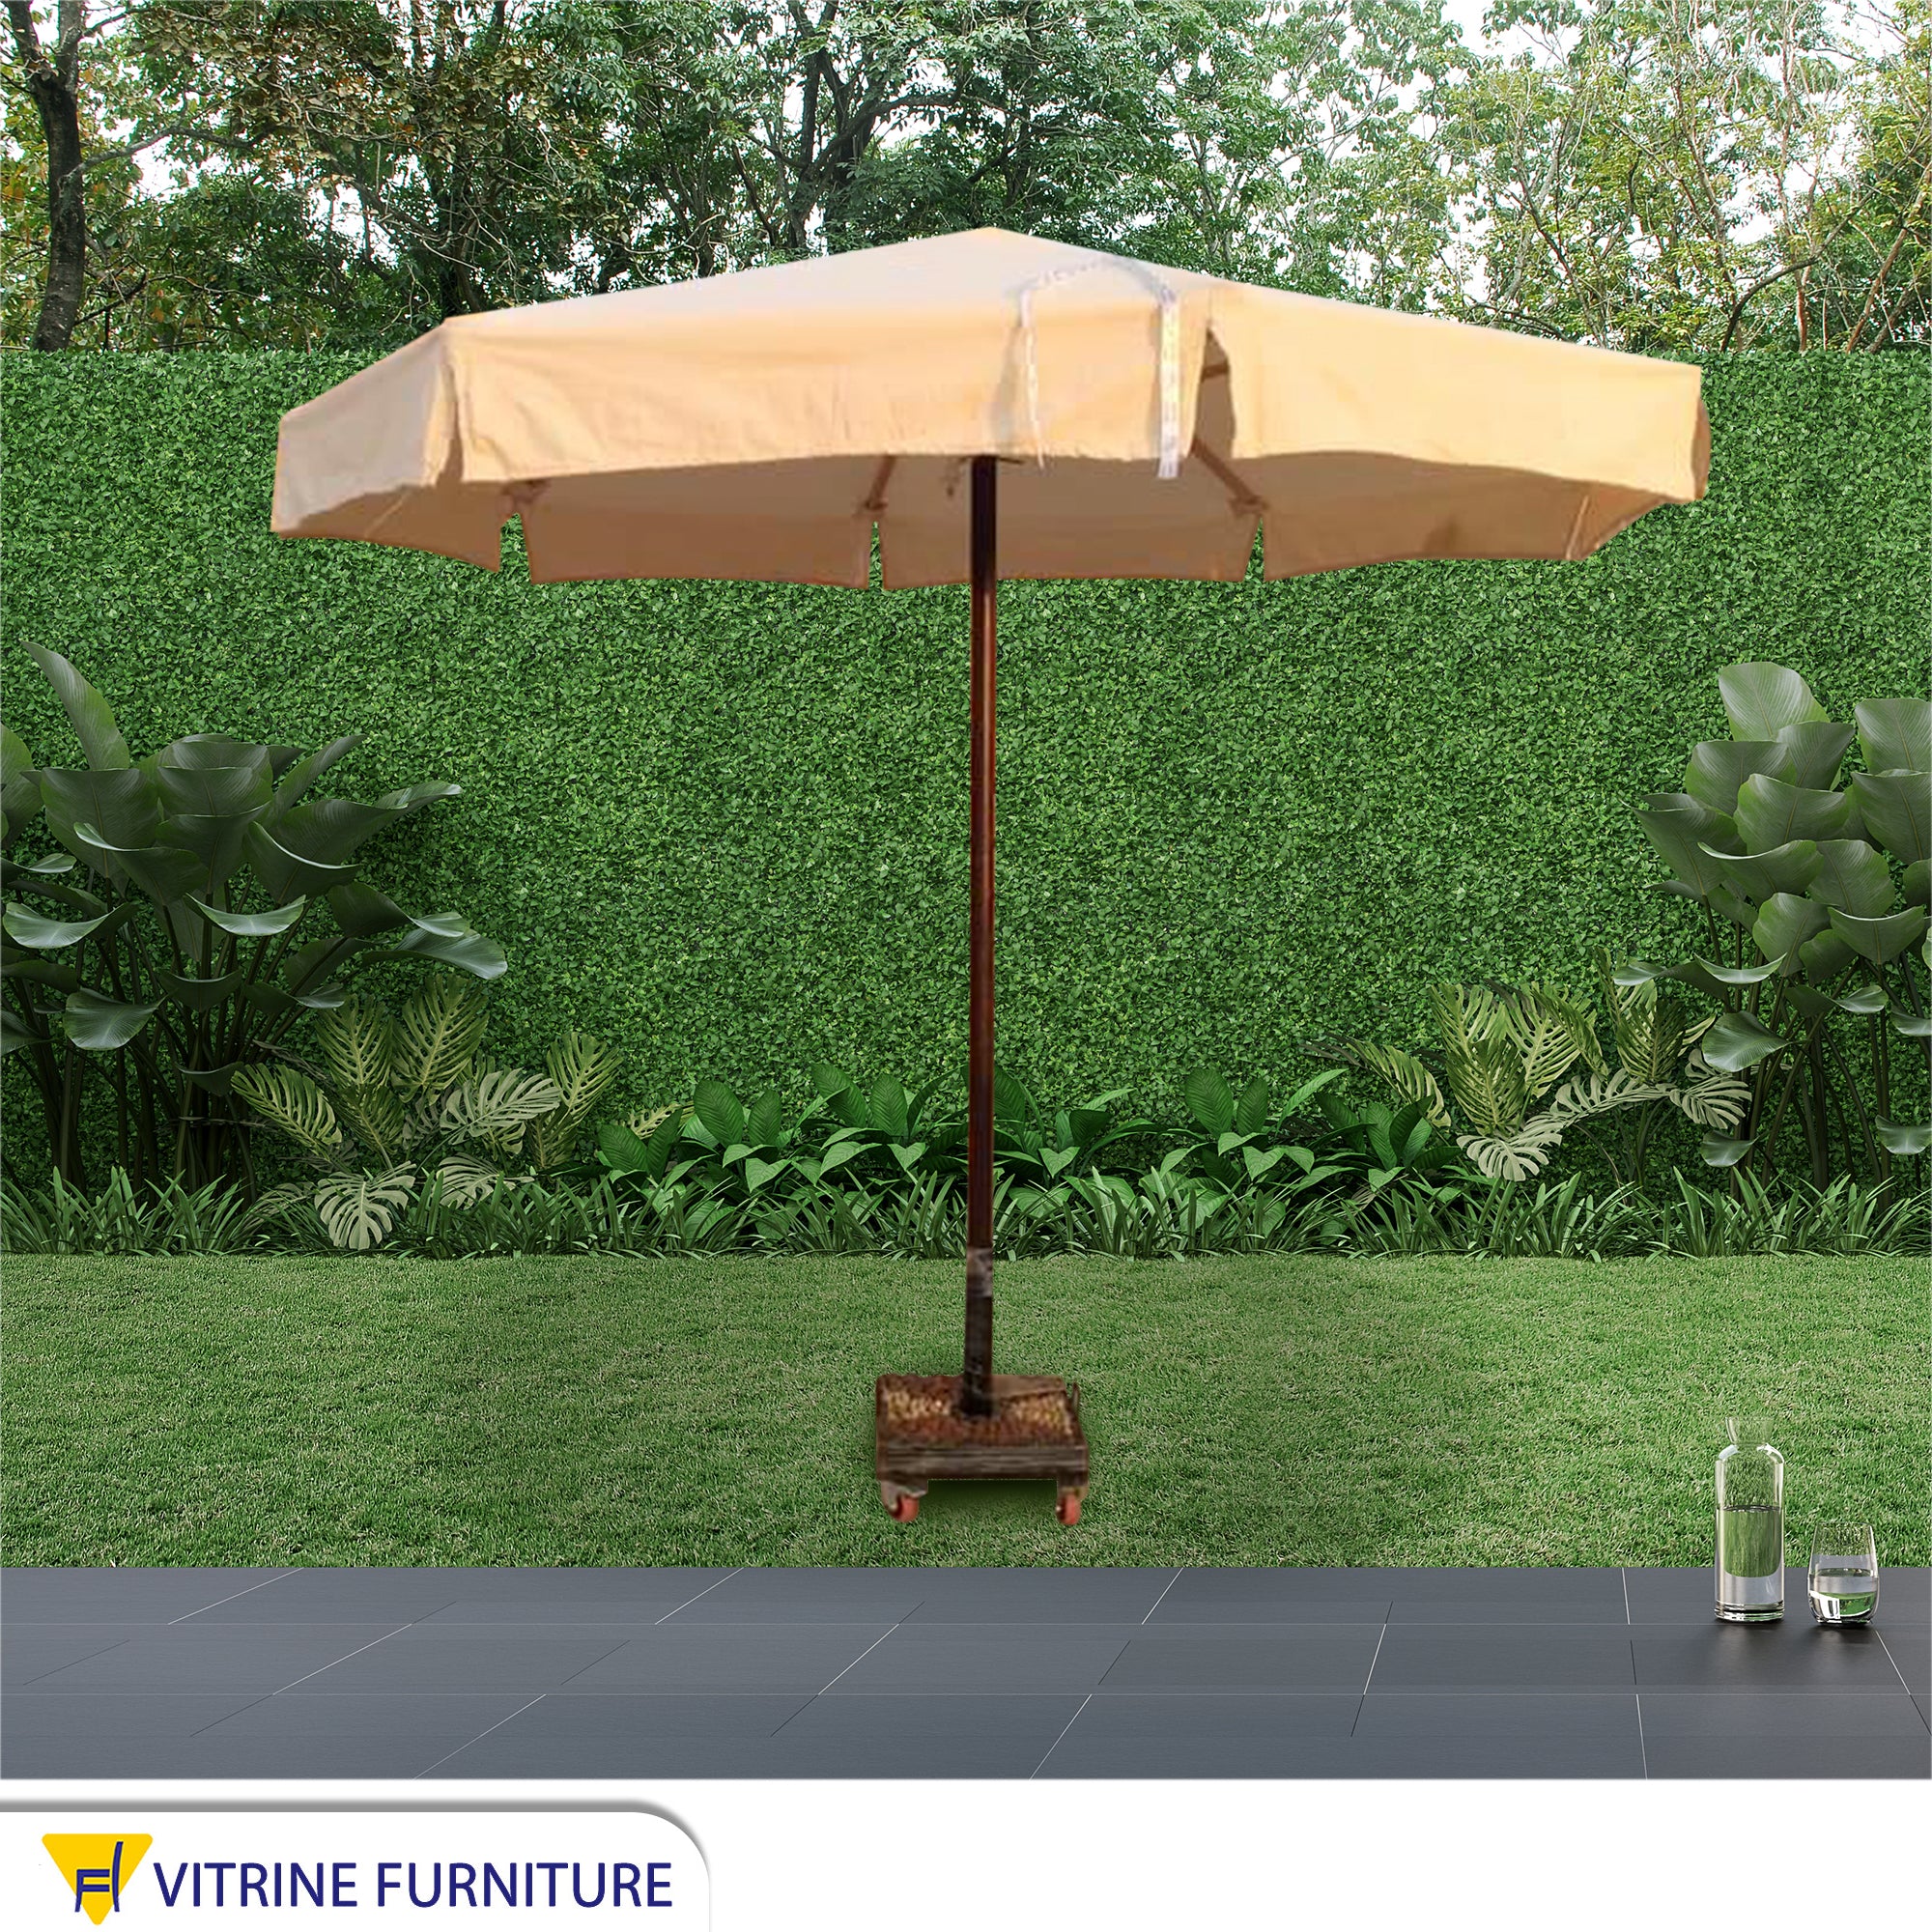 Furniture canopy for outdoor spaces